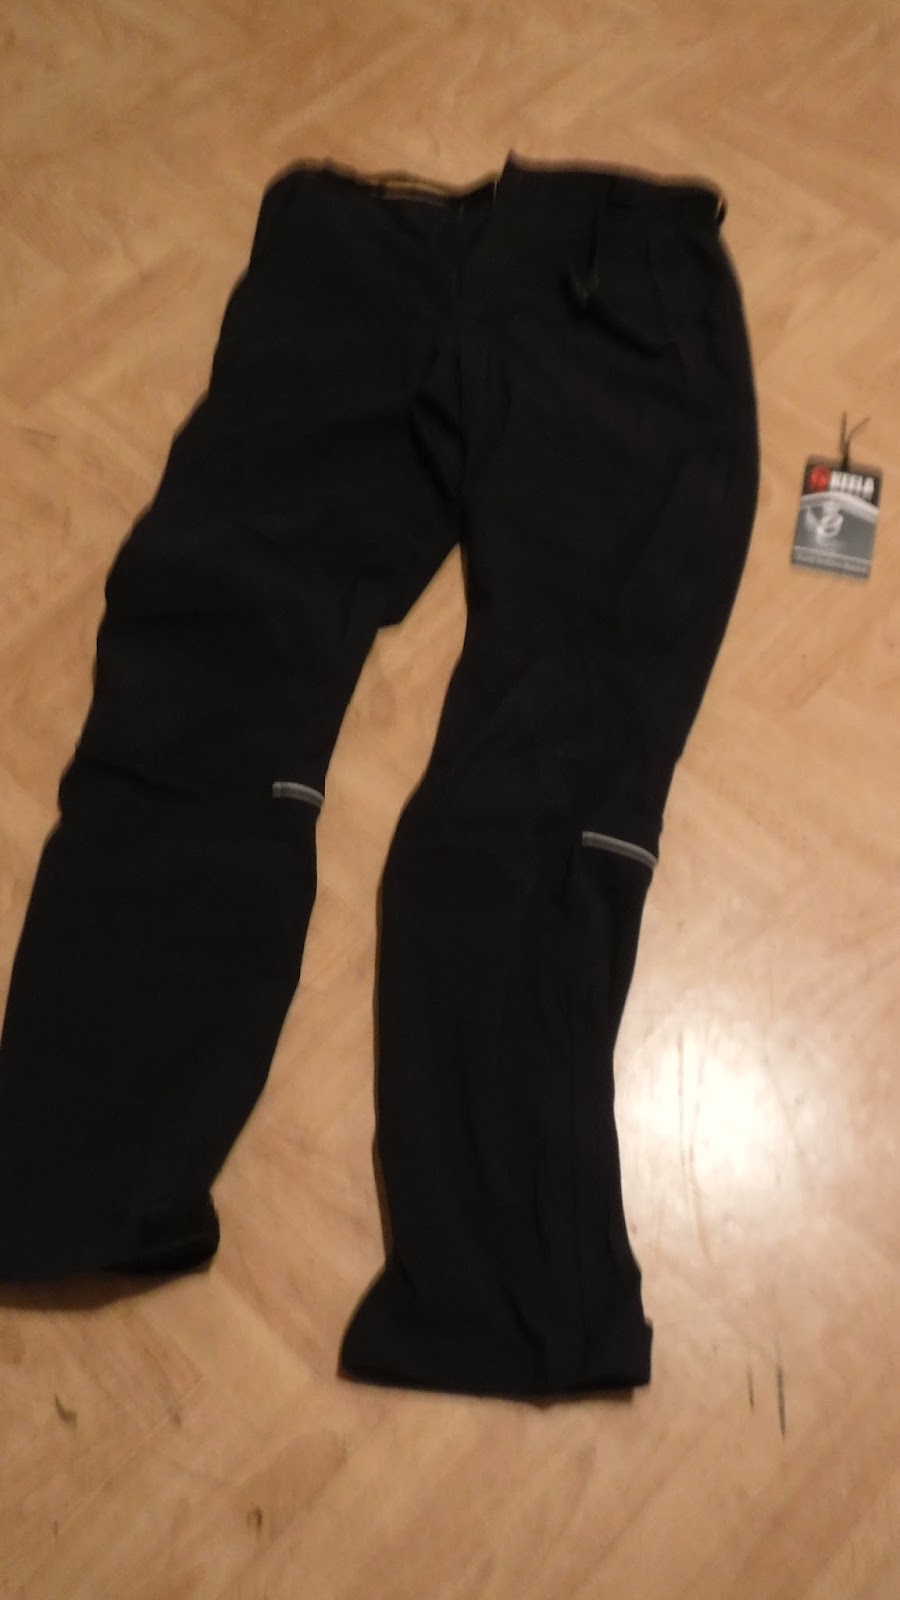 coastrider: KEELA Road Runner cycling trousers; Commuting kit now dialled